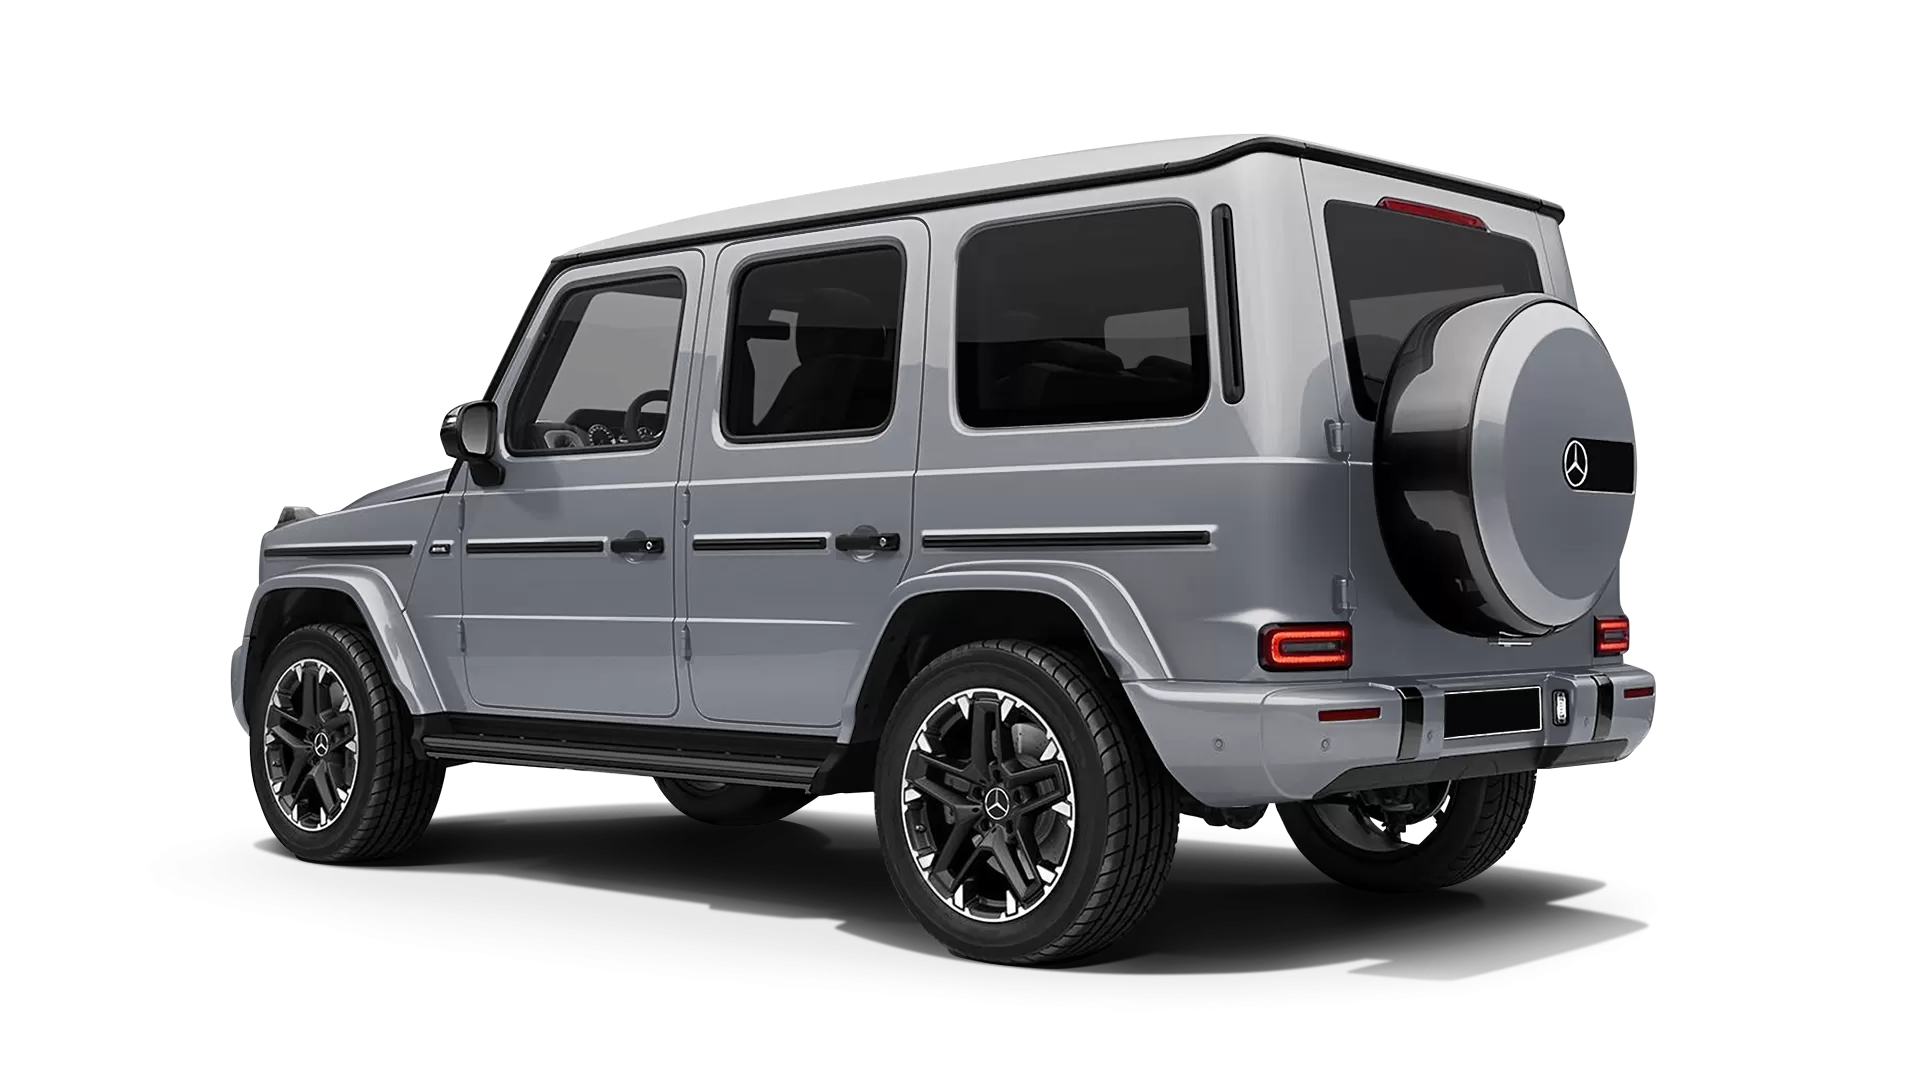 Mercedes G class W463 stock rear view in Iridium Silver color